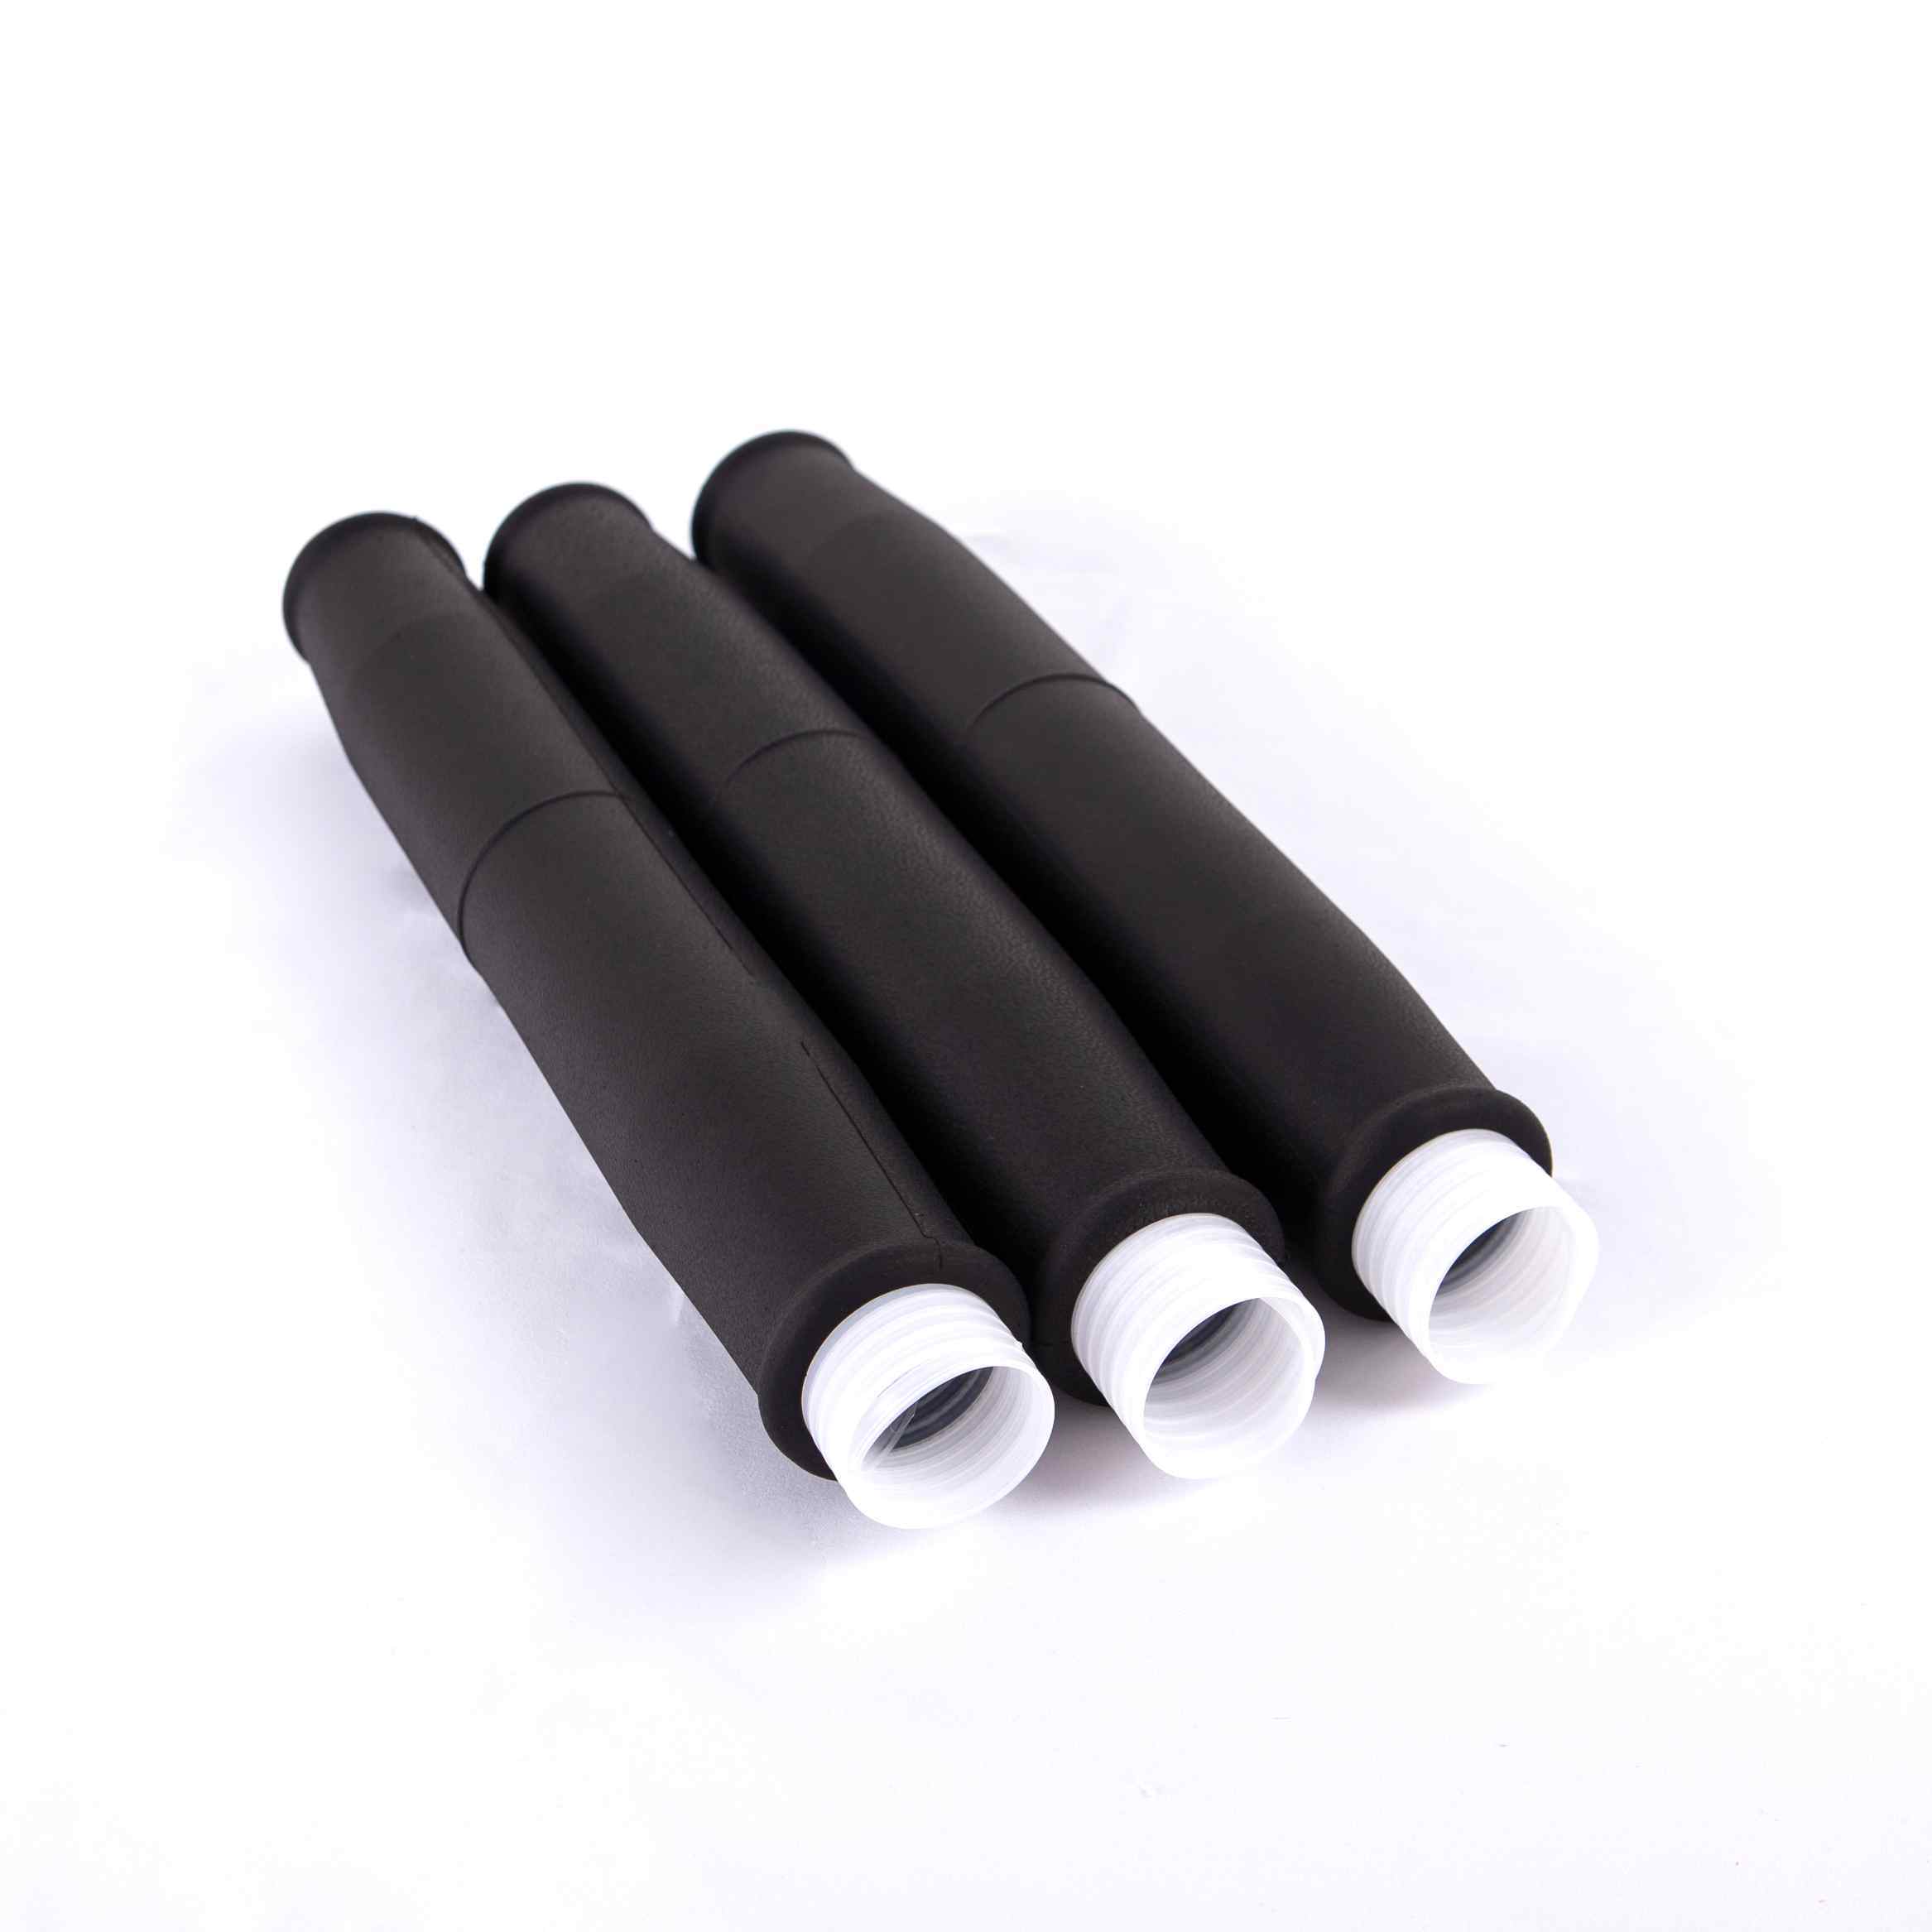 Cold Shrink Tube Cable/Cable Joint Termination Kits 11 Kv/Cold Shrink Type Silicon Rubber Tube